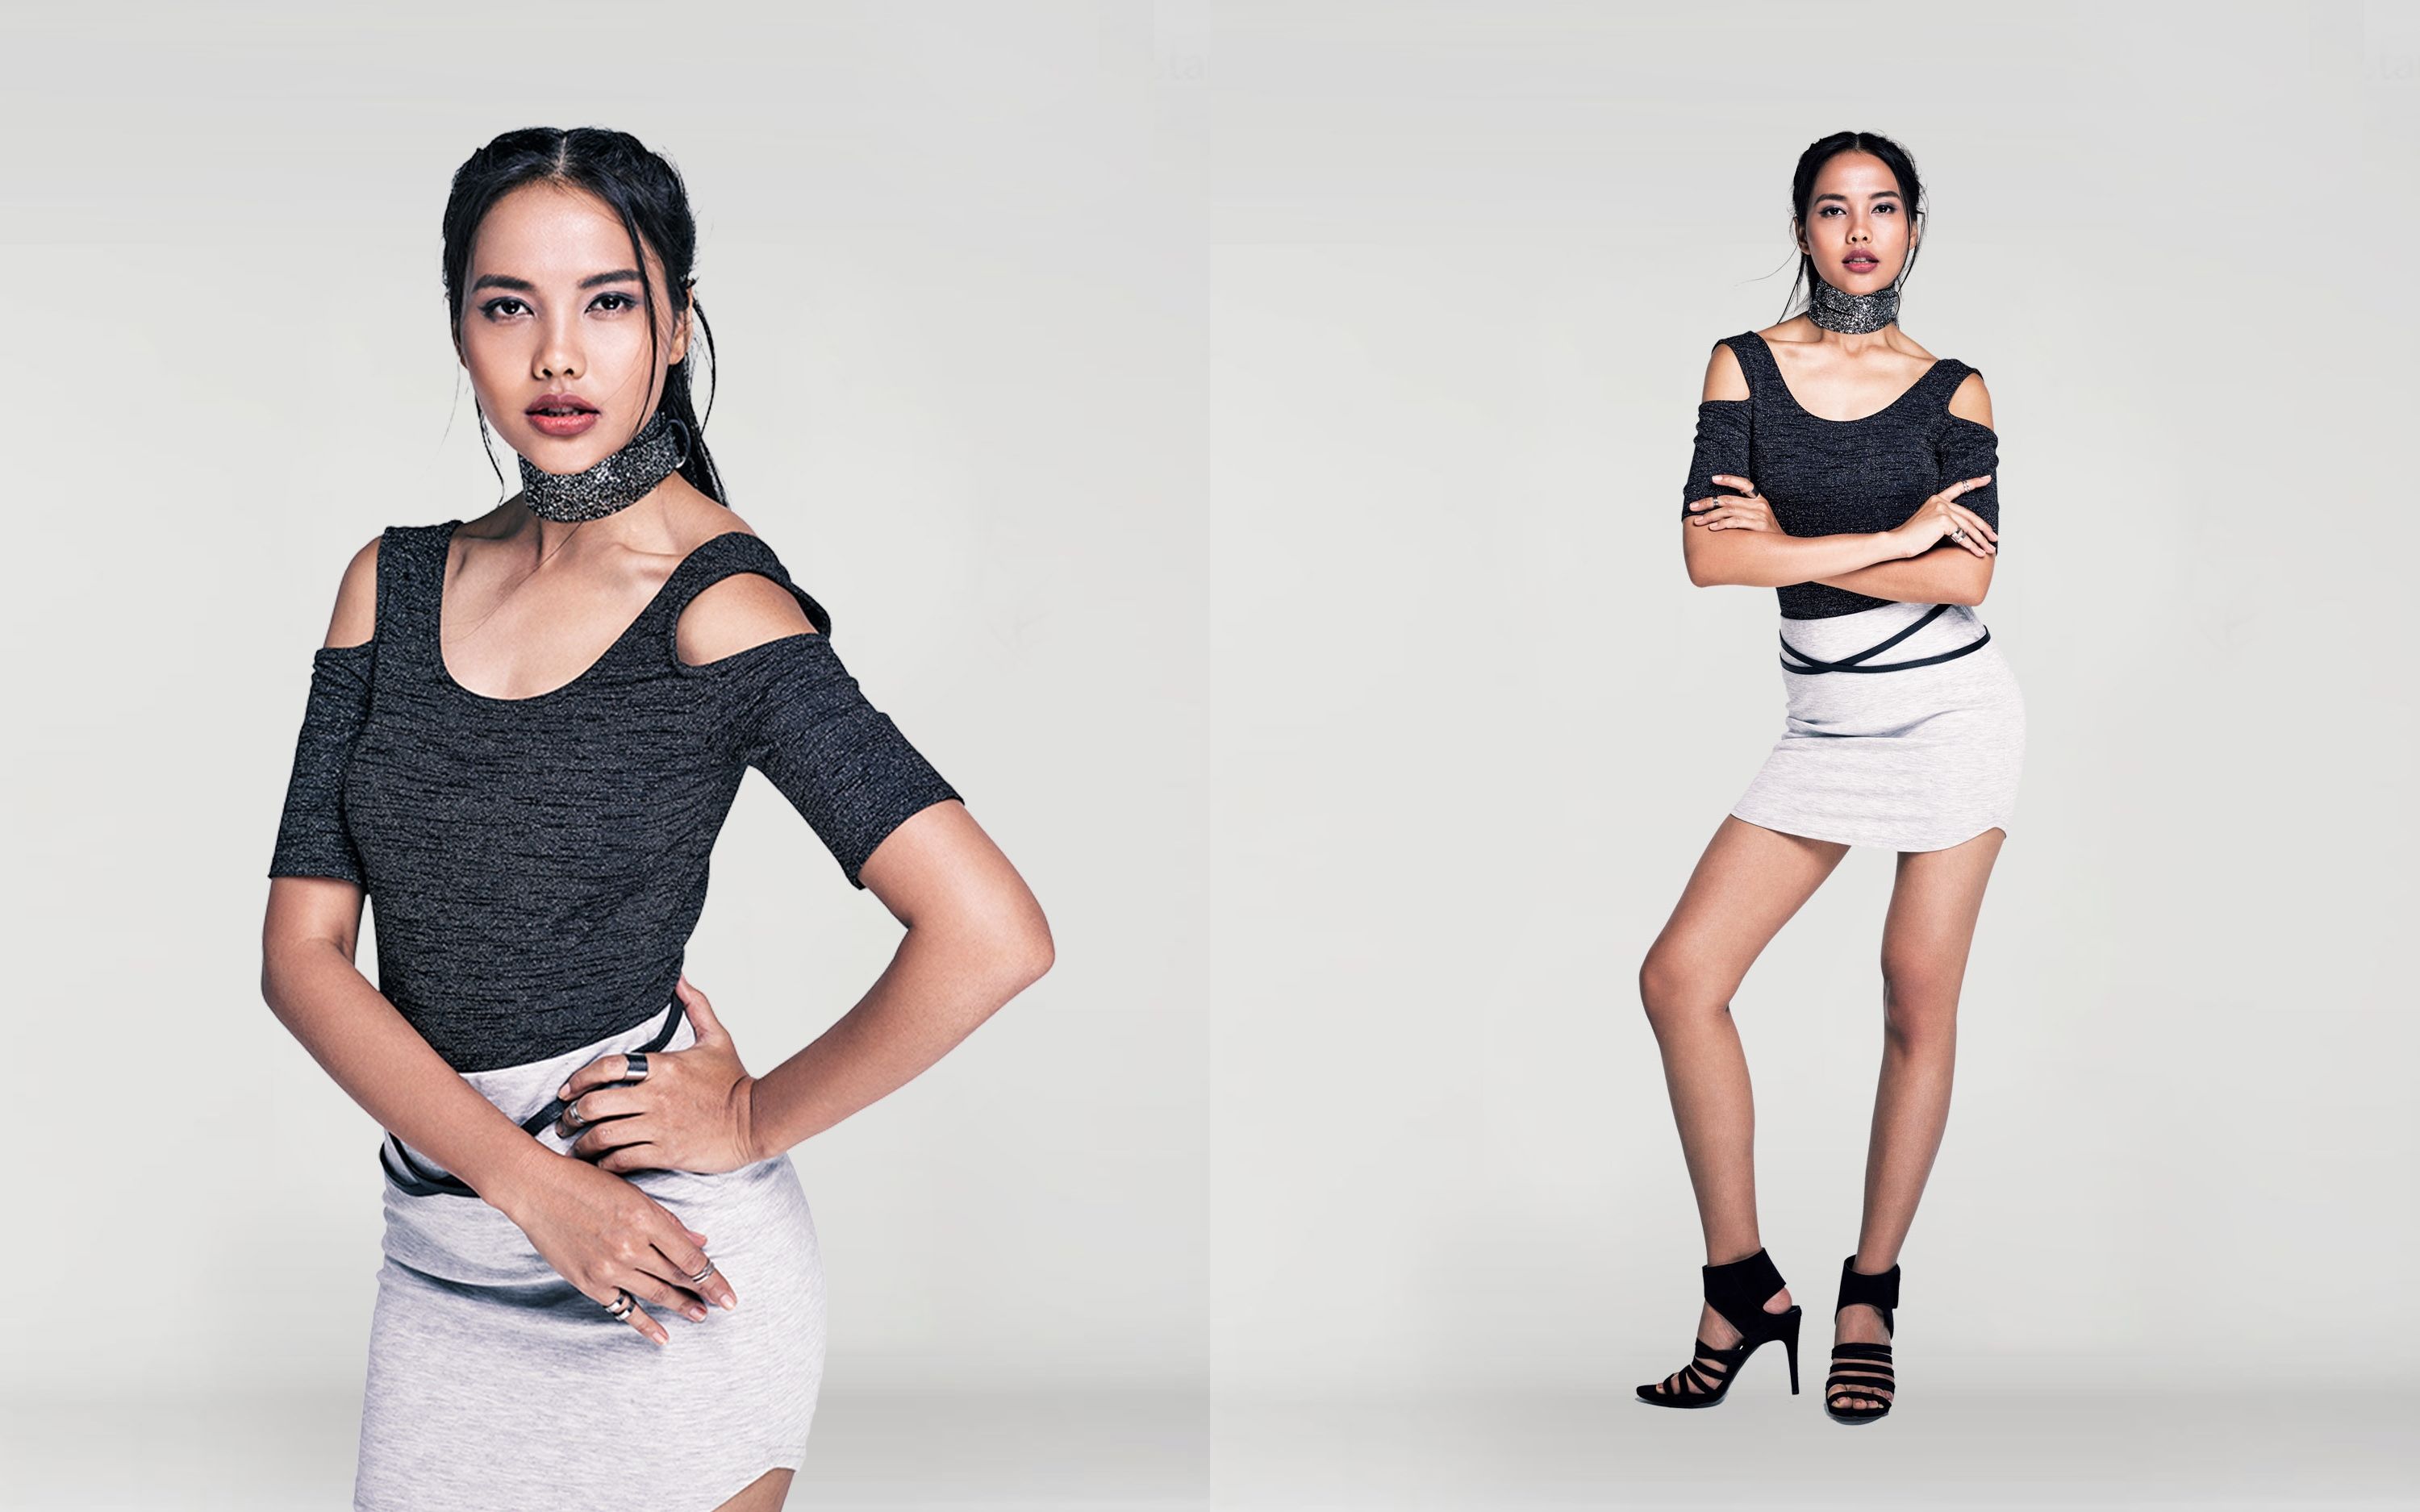 3 Indonesian Models Fight To Be Asia's Next Top Model This Year